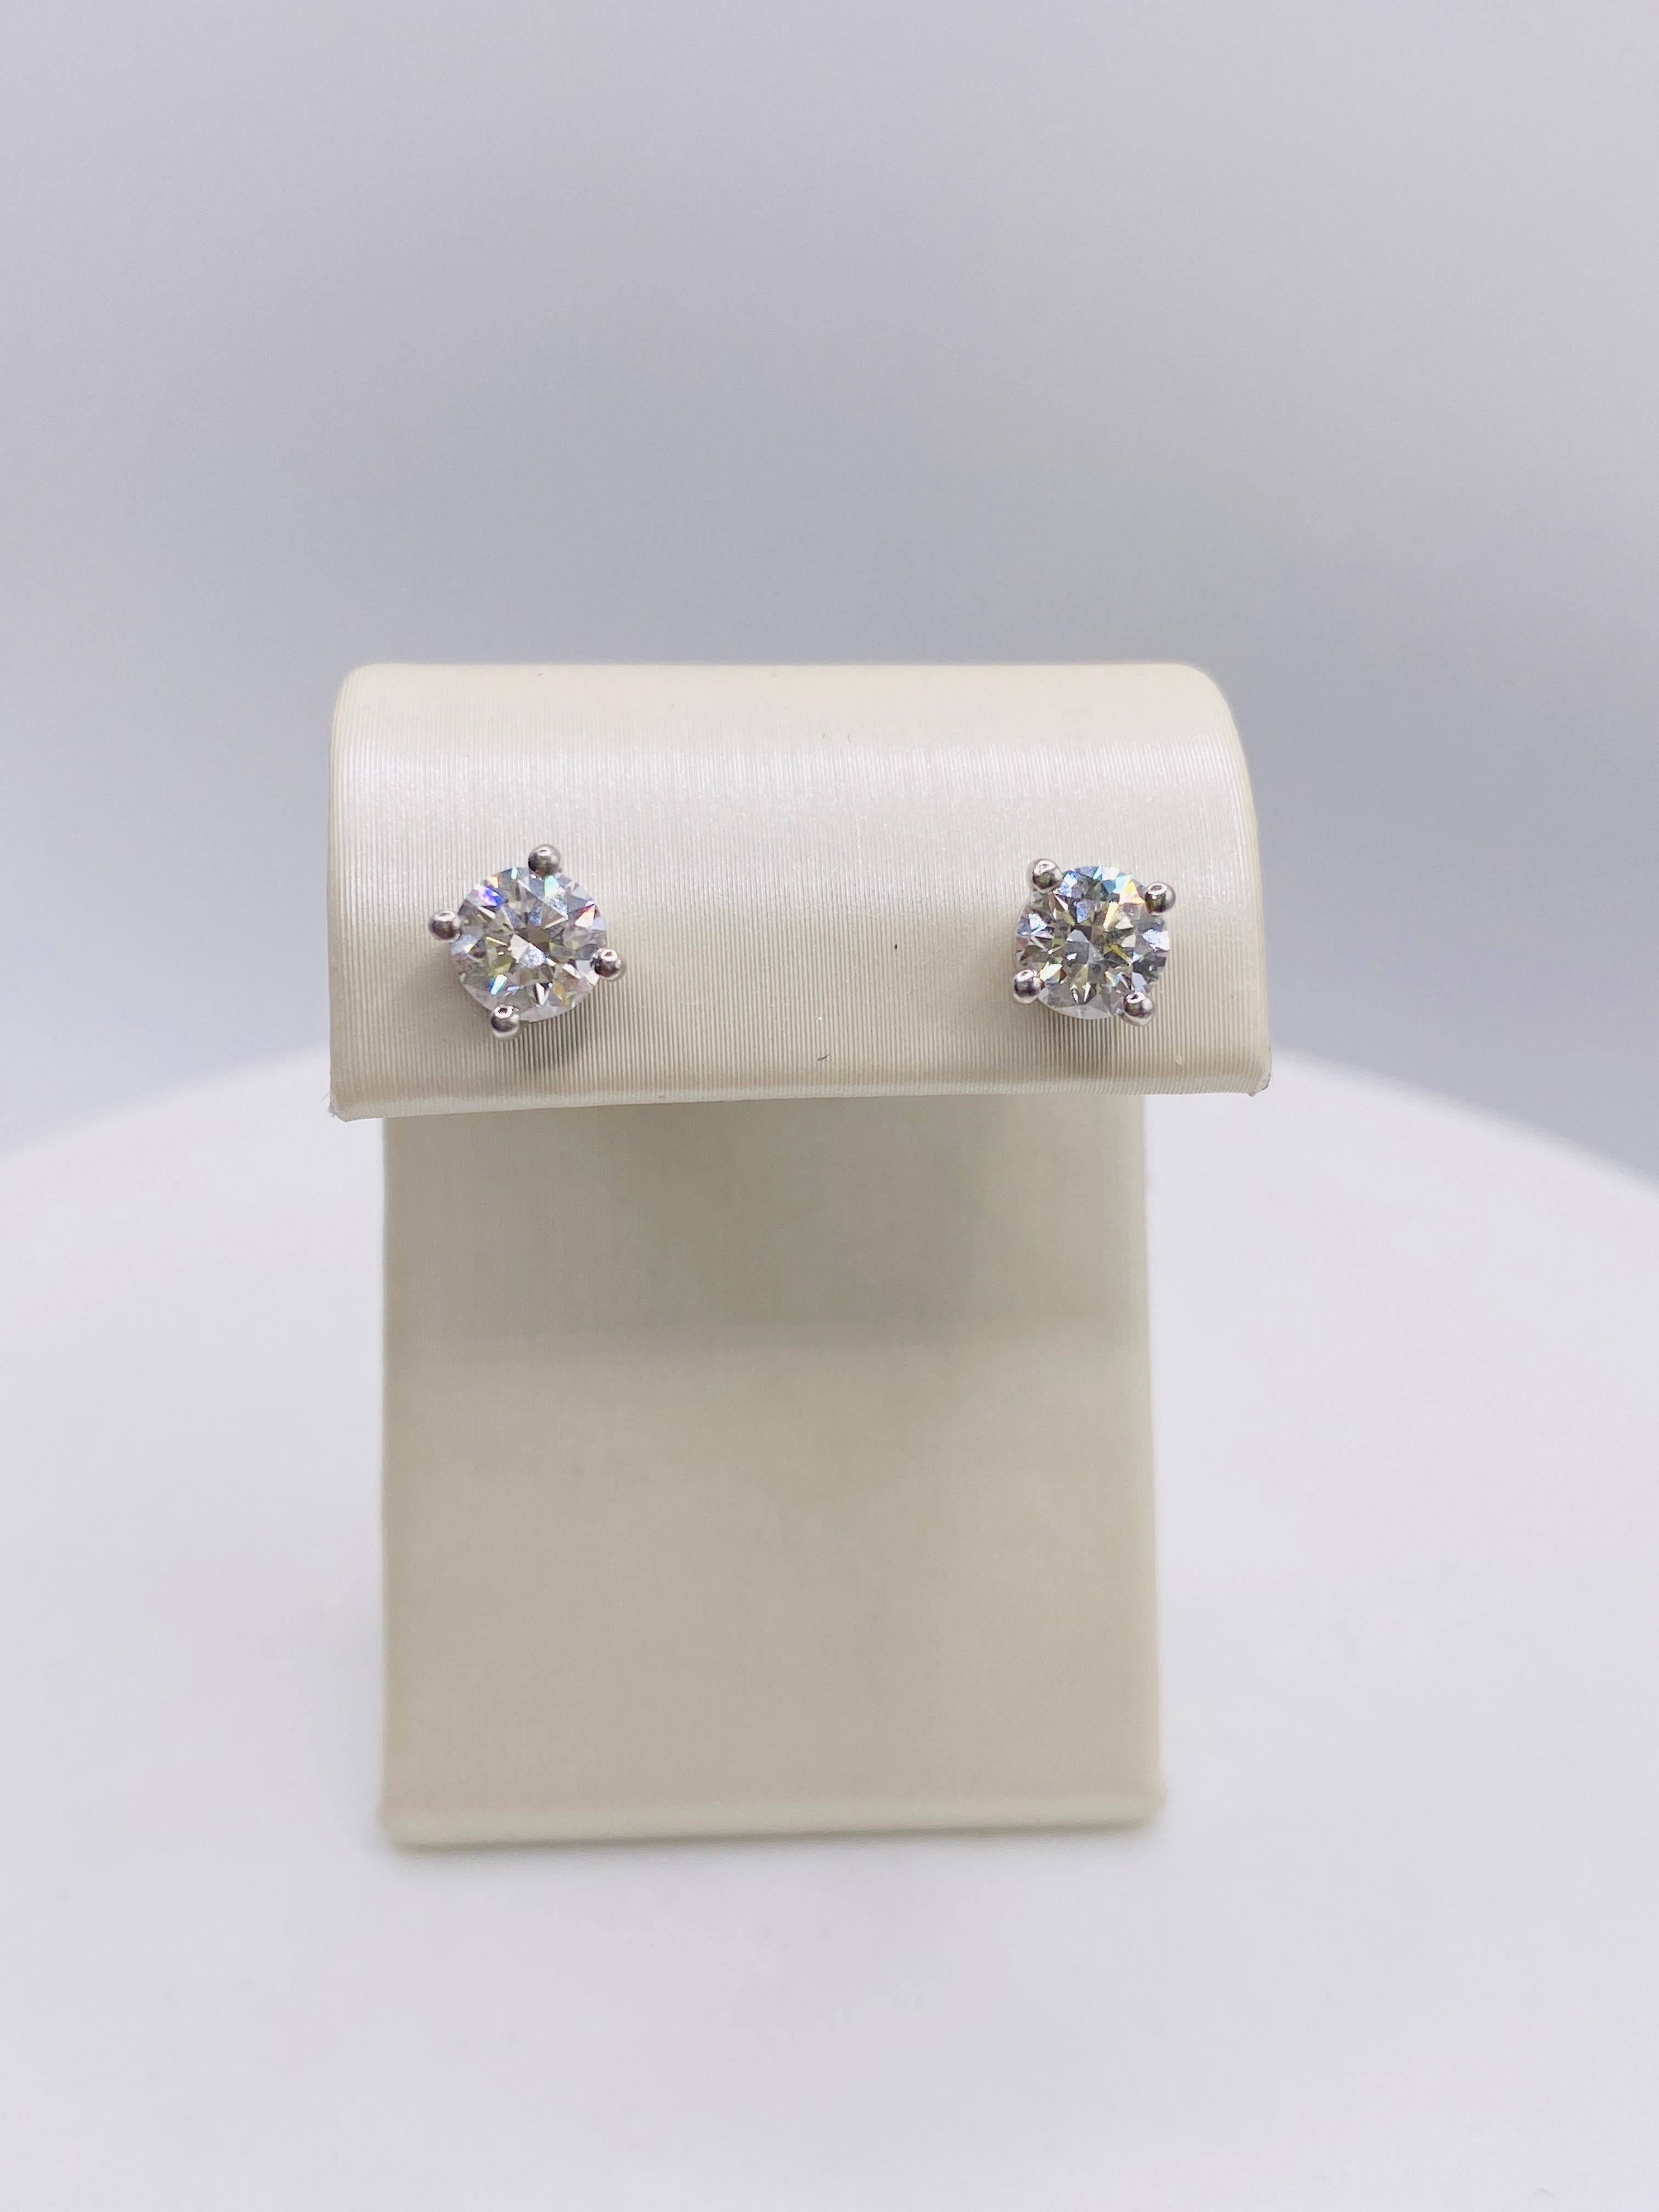 Tiffany & Co 1.06ctw diamond platinum stud earrings G/VS1. Excellent cut. Marked T&Co, PT950, 13606518 (product number).